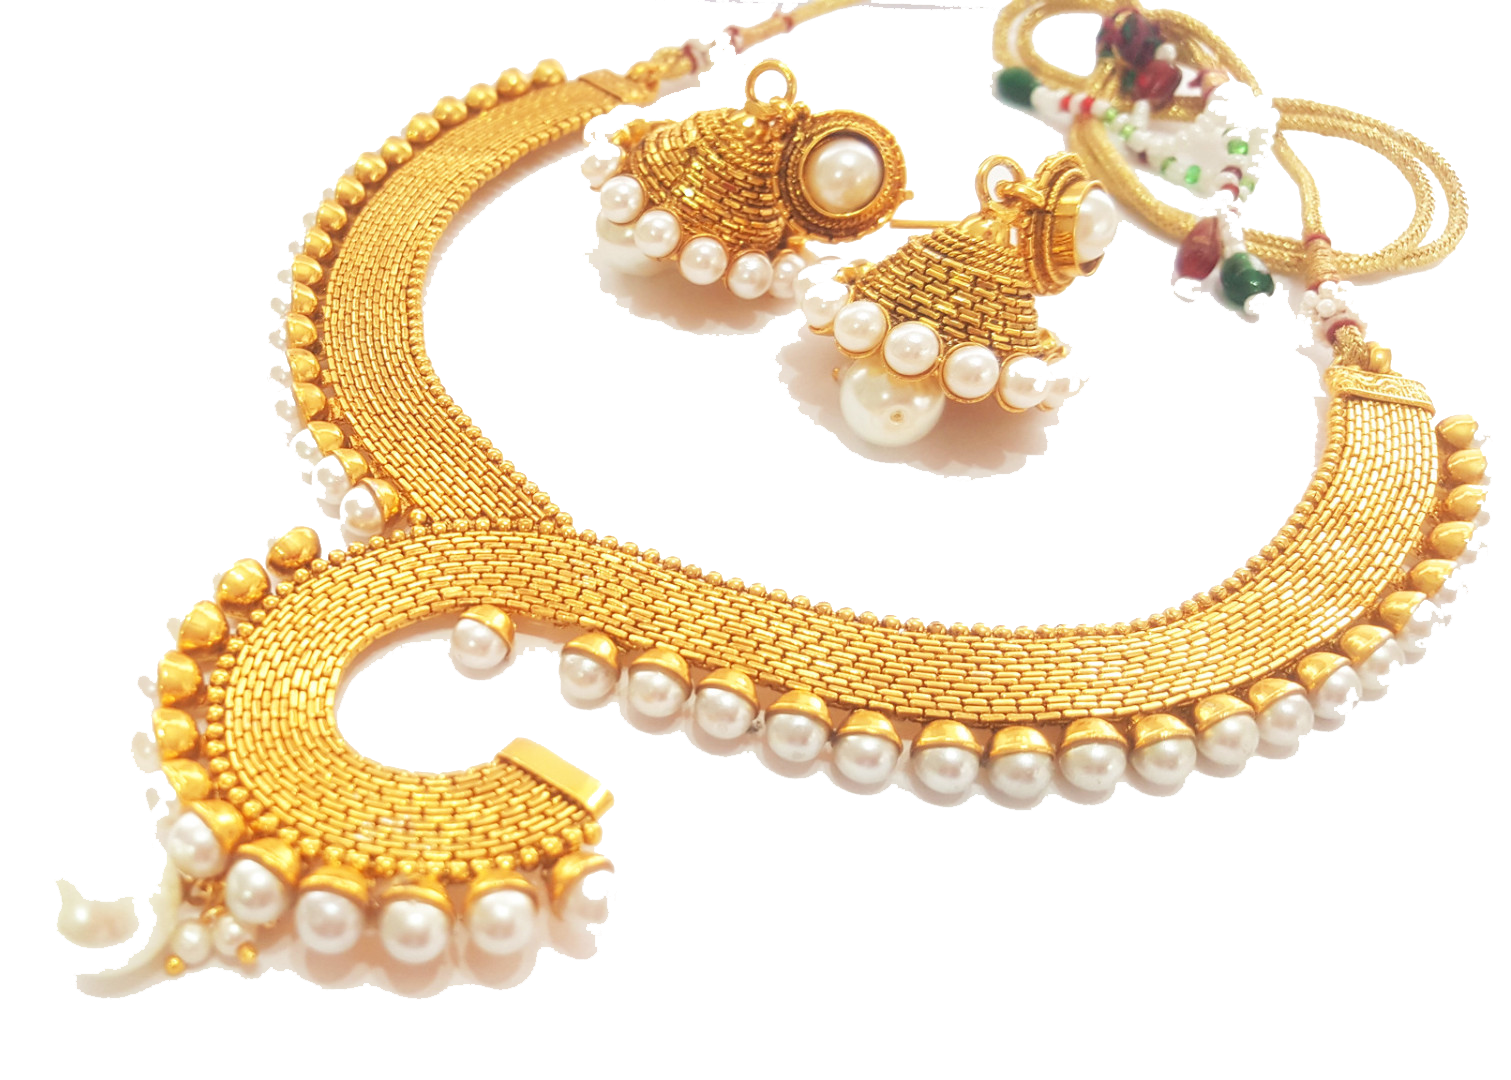 Download Necklace Jewellery Download Free Image HQ PNG Image | FreePNGImg